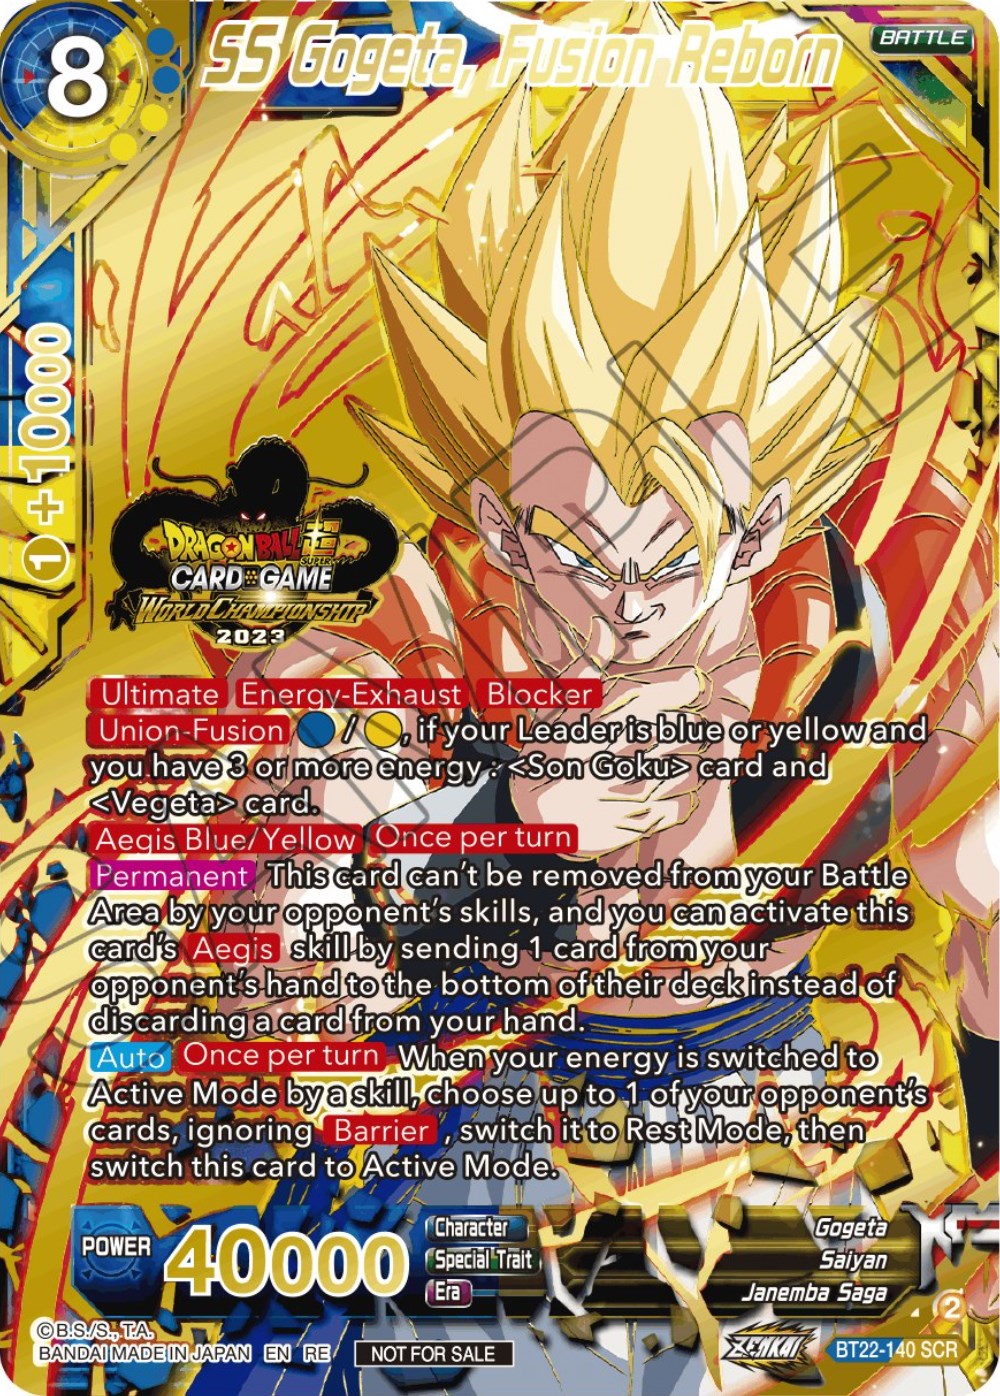 SS Gogeta, Fusion Reborn (2023 World Championship Stamp) (BT22-140) [Tournament Promotion Cards] | North Valley Games